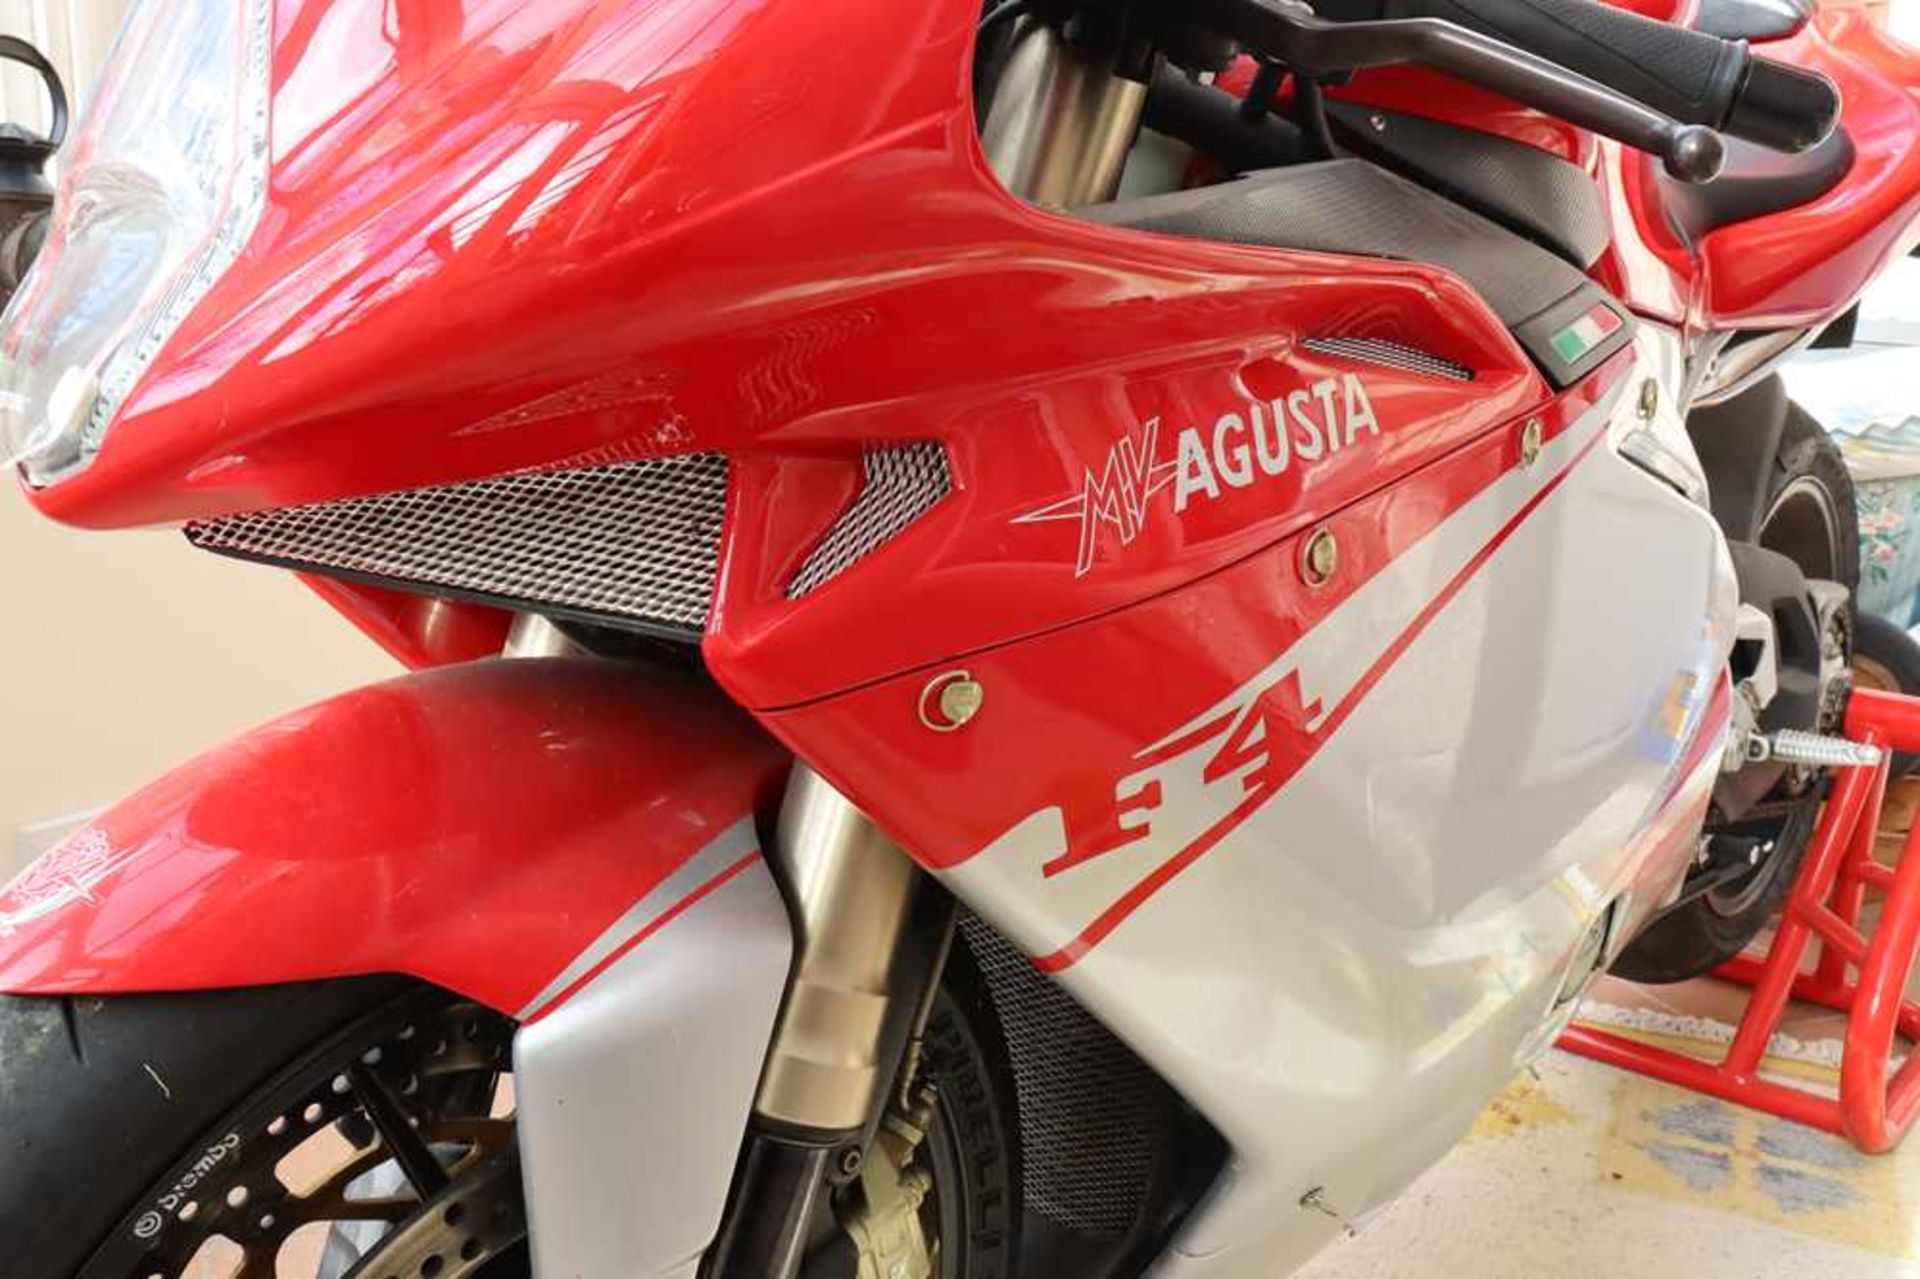 2007 MV Agusta F4 1000 R One owner from new - Image 5 of 41